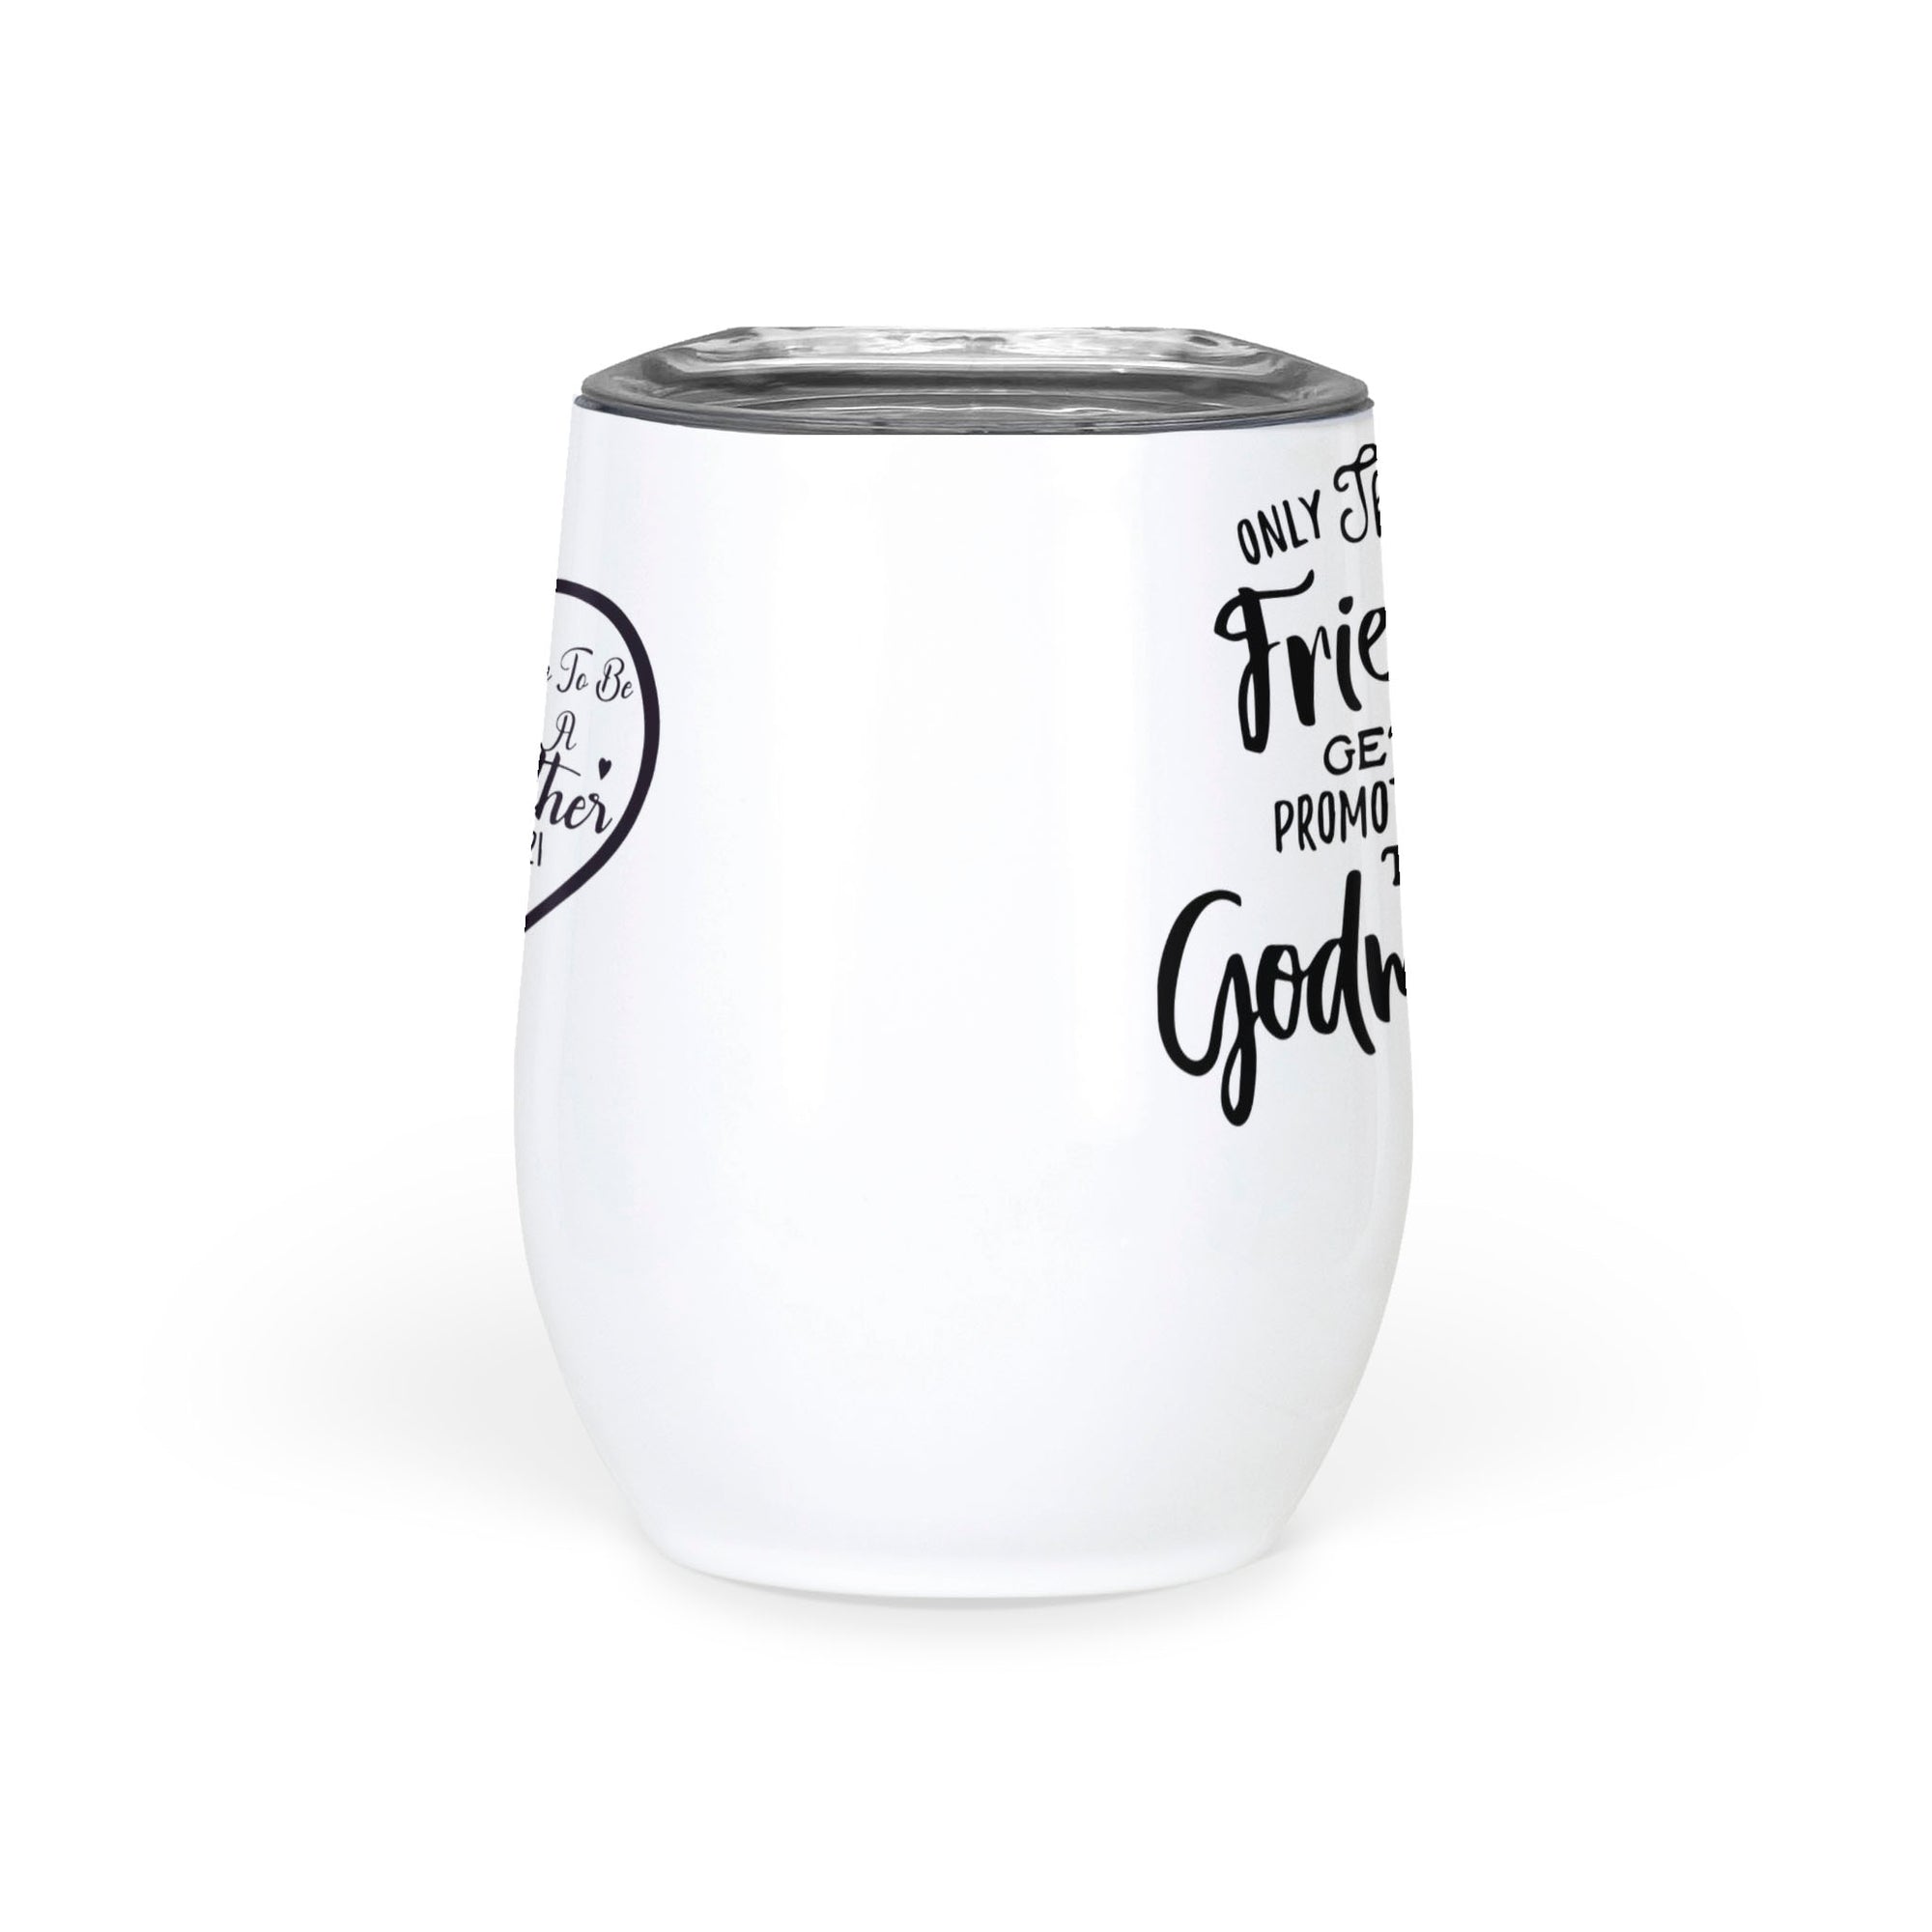 Godmother Gift | Best Friends Get Promoted to Godmother Wine Tumbler | Godmom to Be | Baptism Gift | Godmother Proposal | Best Friend Present Wine Tumbler